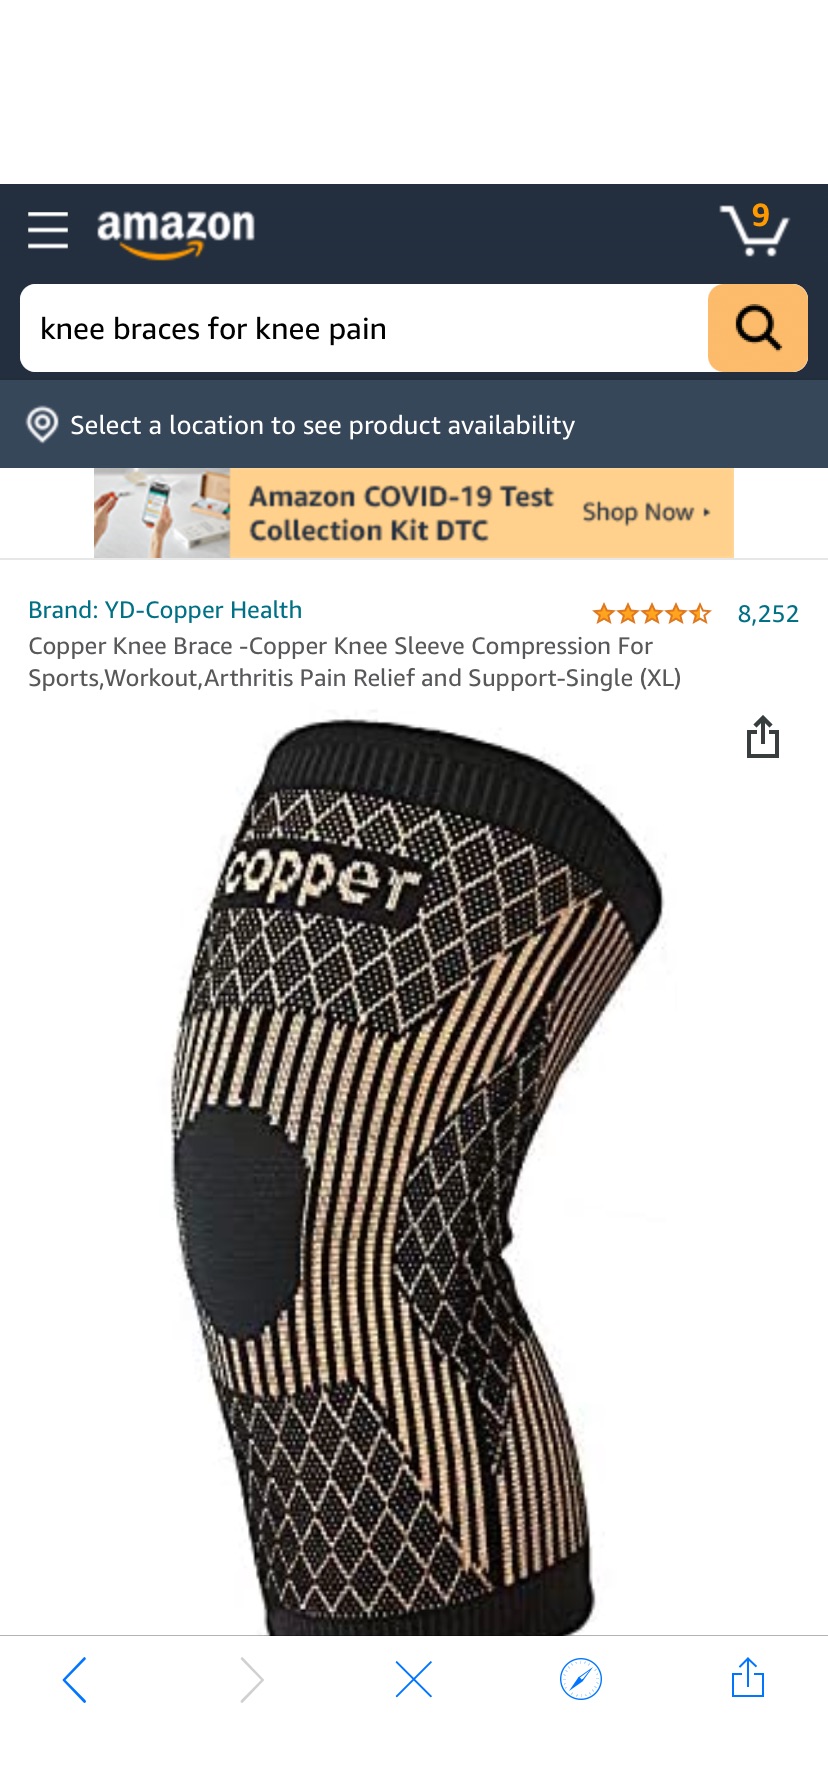 Amazon.com: Copper Knee护膝 Brace -Copper Knee Sleeve Compression For Sports,Workout,Arthritis Pain Relief and Support-Single (XL): Industrial & Scientific